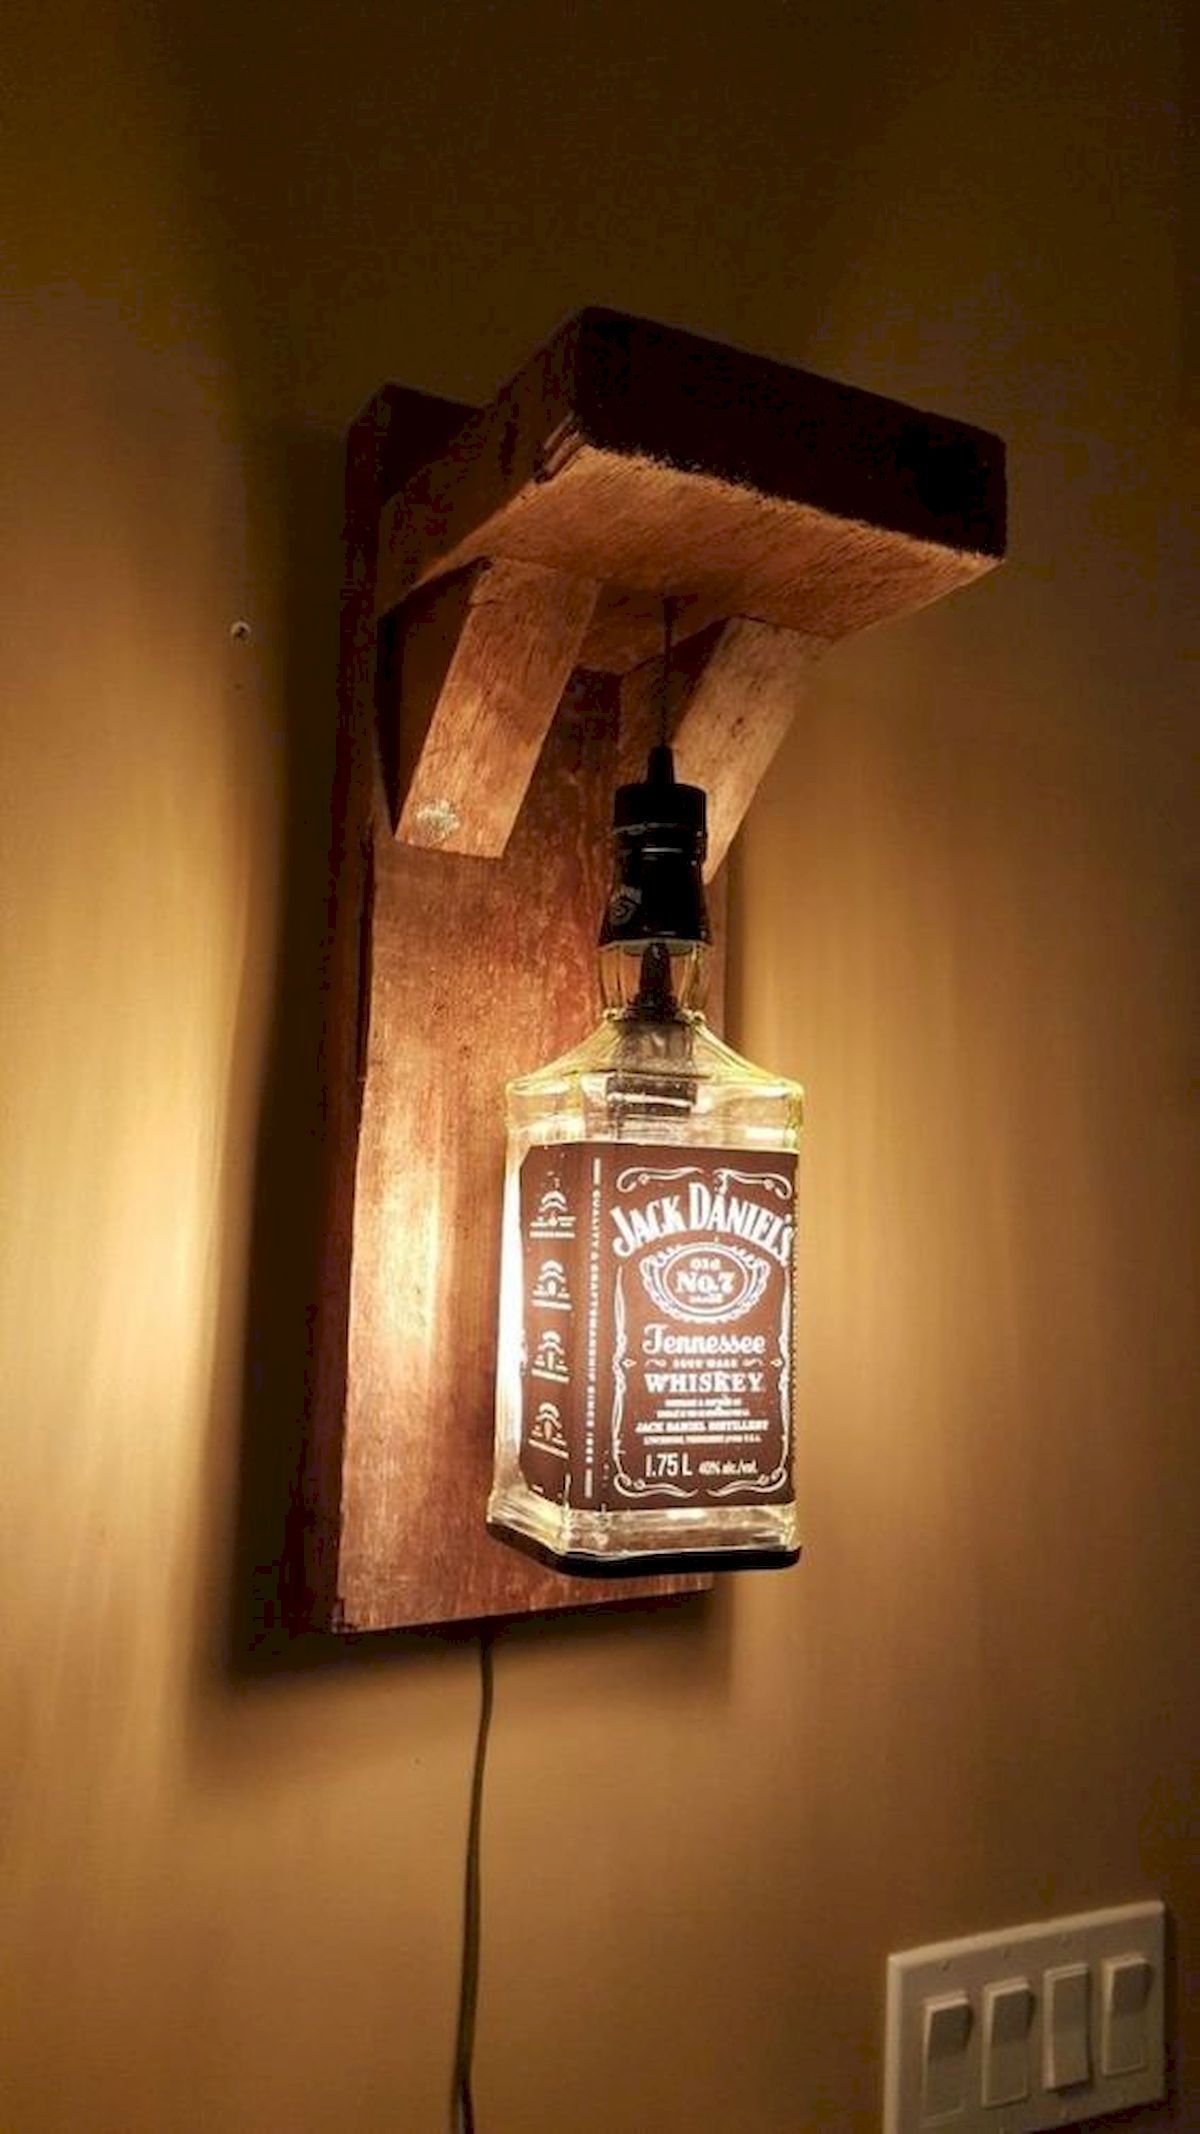 40 Fantastic Easy Crafts DIY Projects Ideas To Make Money -   17 diy projects For Men liquor bottles ideas